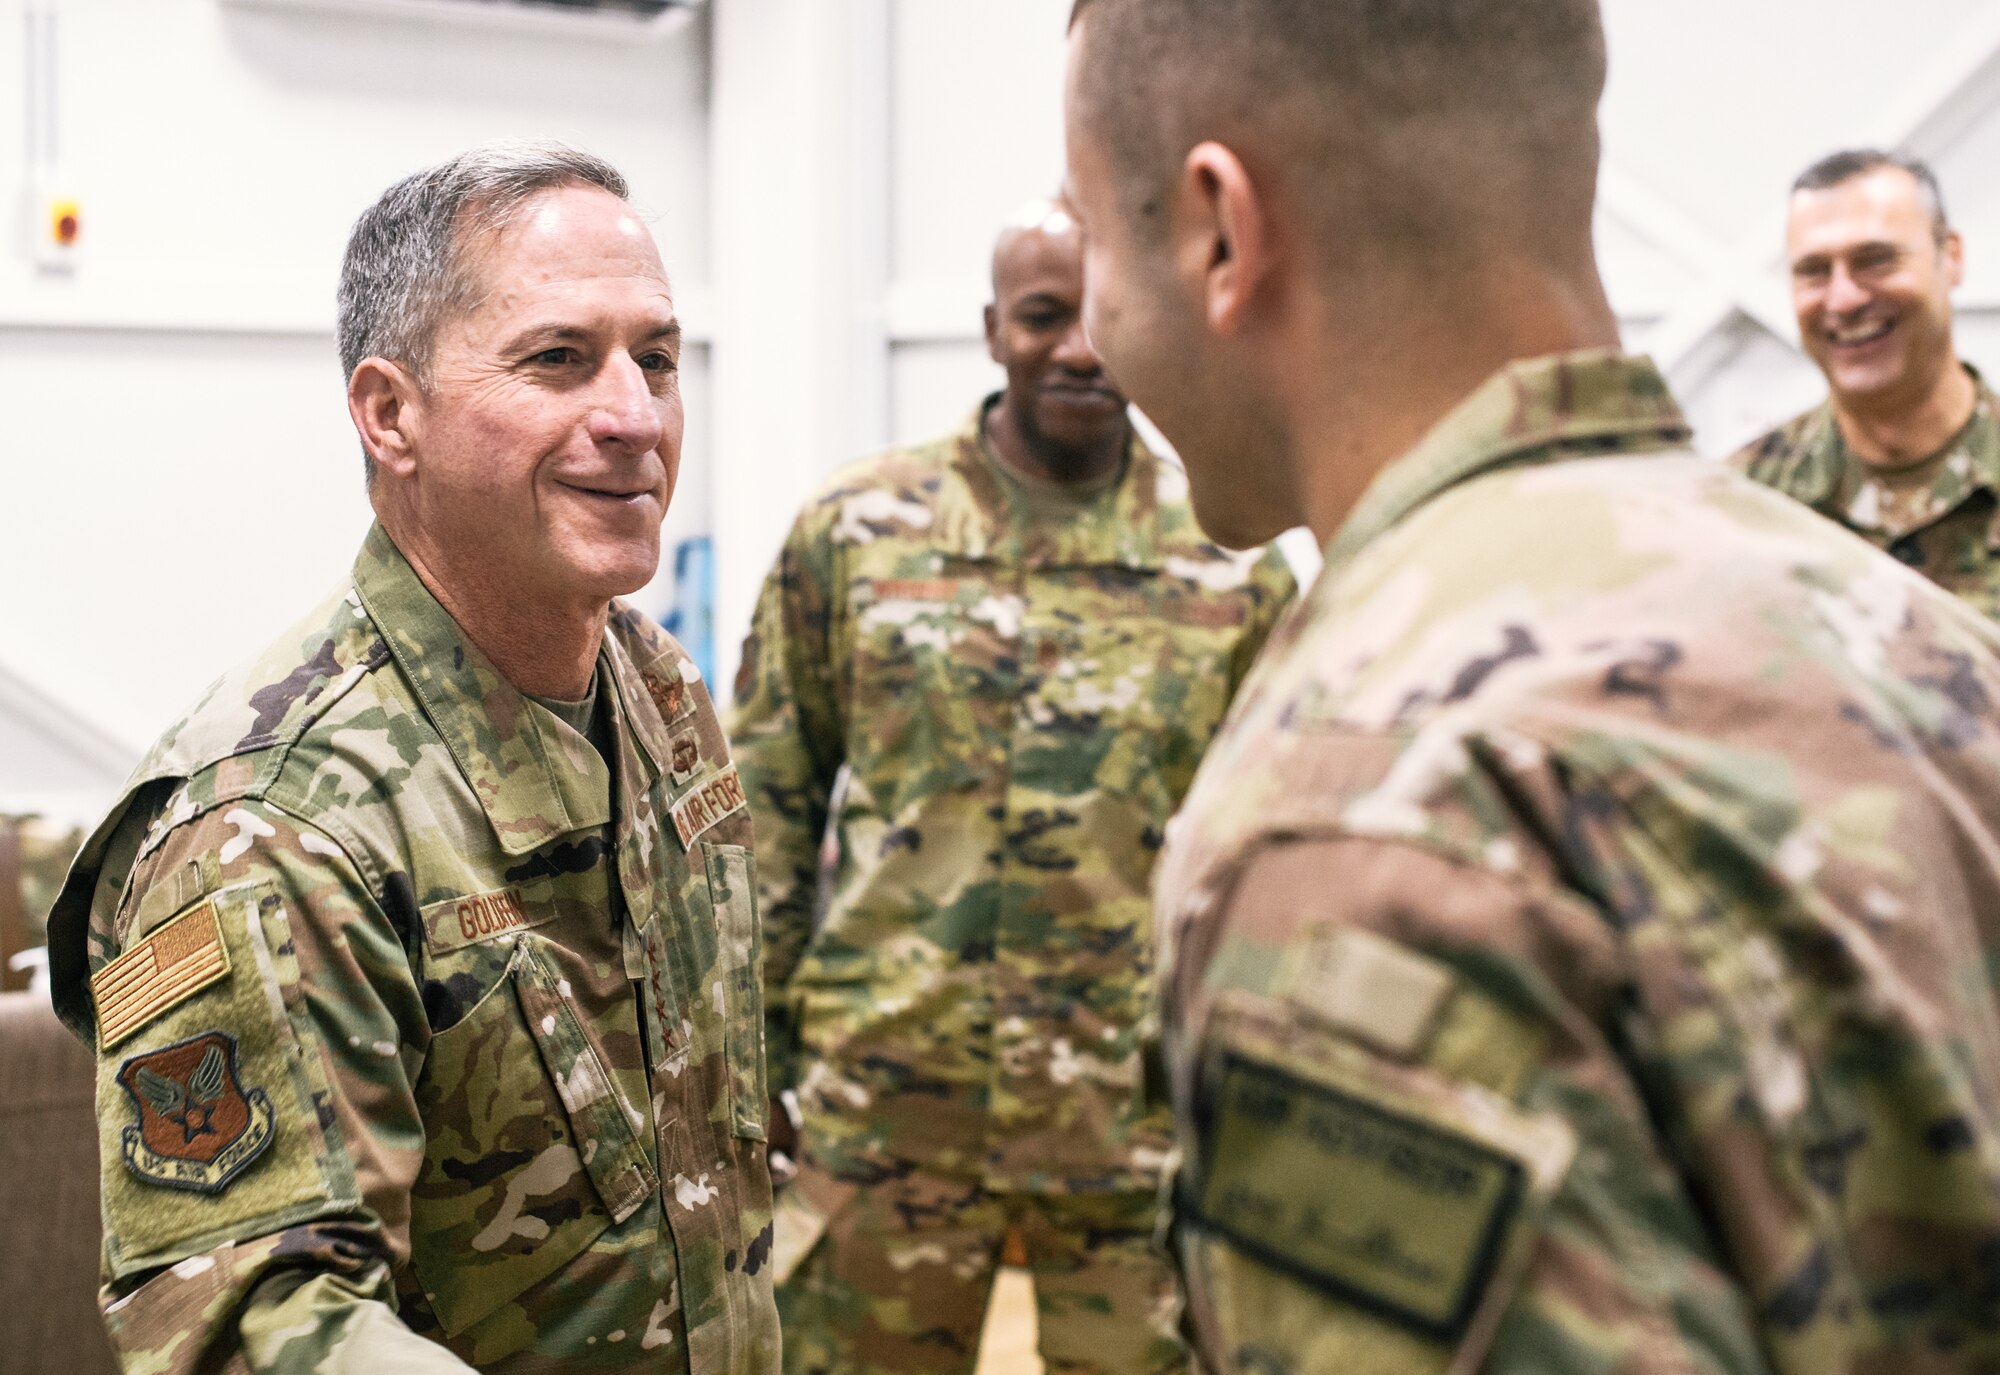 Air Force Chief of Staff Gen. David L. Goldfein congratulates a deployed Airman for superb performance at an undisclosed location in Southwest Asia, Dec. 22, 2018. Goldfein, Chief Master Sgt. of the Air Force Kaleth O. Wright, and U.S. Air Forces Central Command commander Lt. Gen. Joseph Guastella traveled throughout U.S. Central Command's area of responsibility thanking Airmen for their sacrifice, recognizing outstanding performers and listening to Airmen during the holiday season. (U.S. Air Force photo by Staff Sgt. Jordan Castelan)